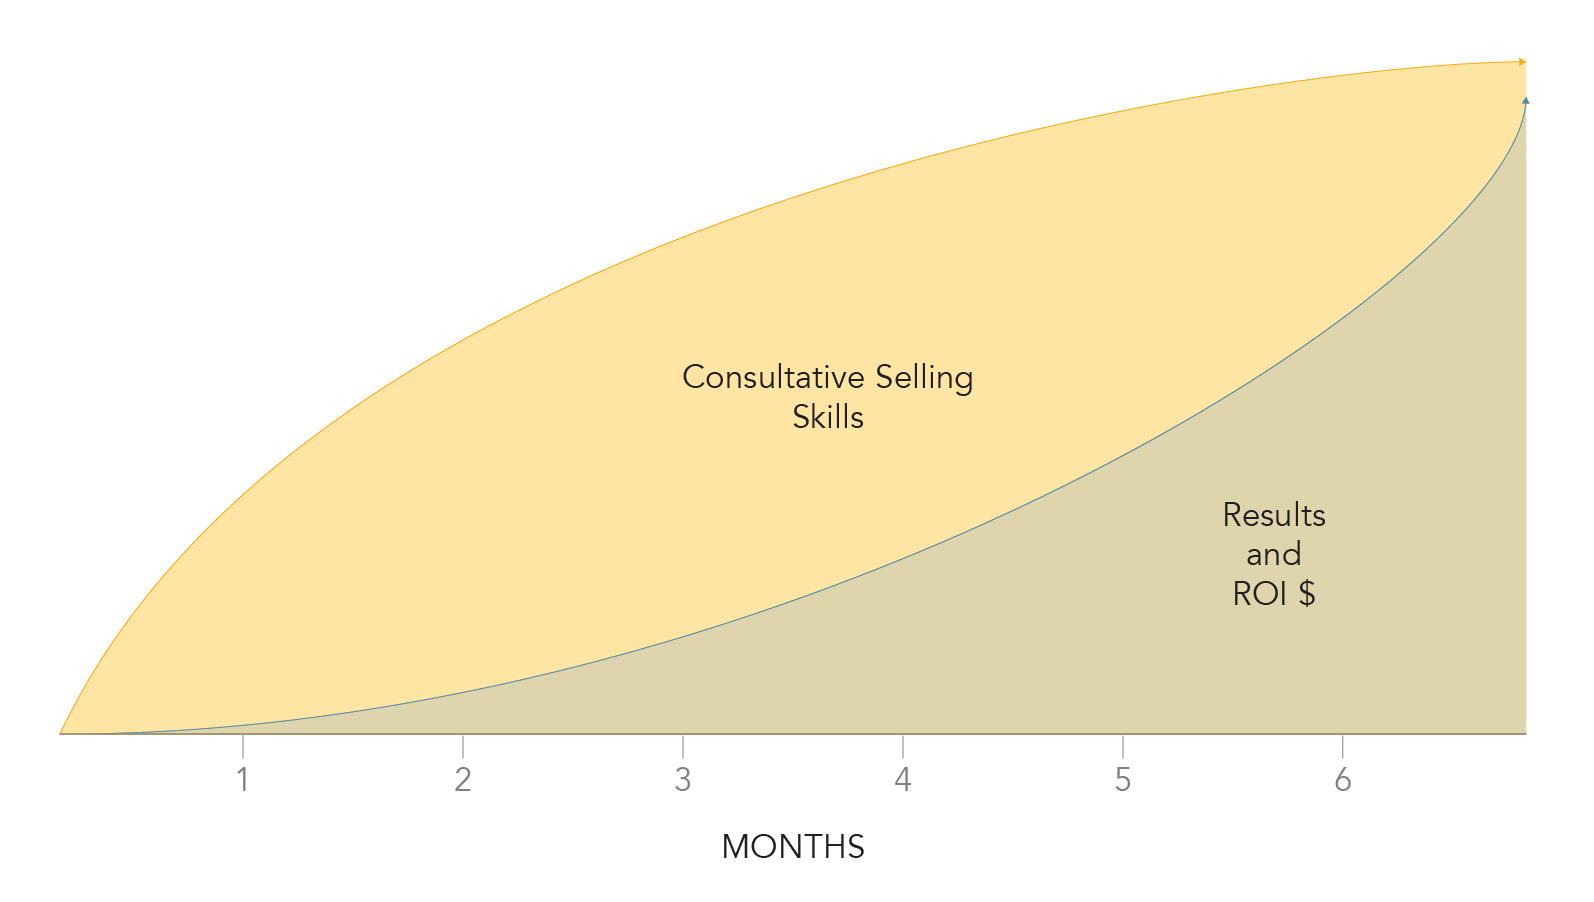 Short term results of a consultative selling sales training program